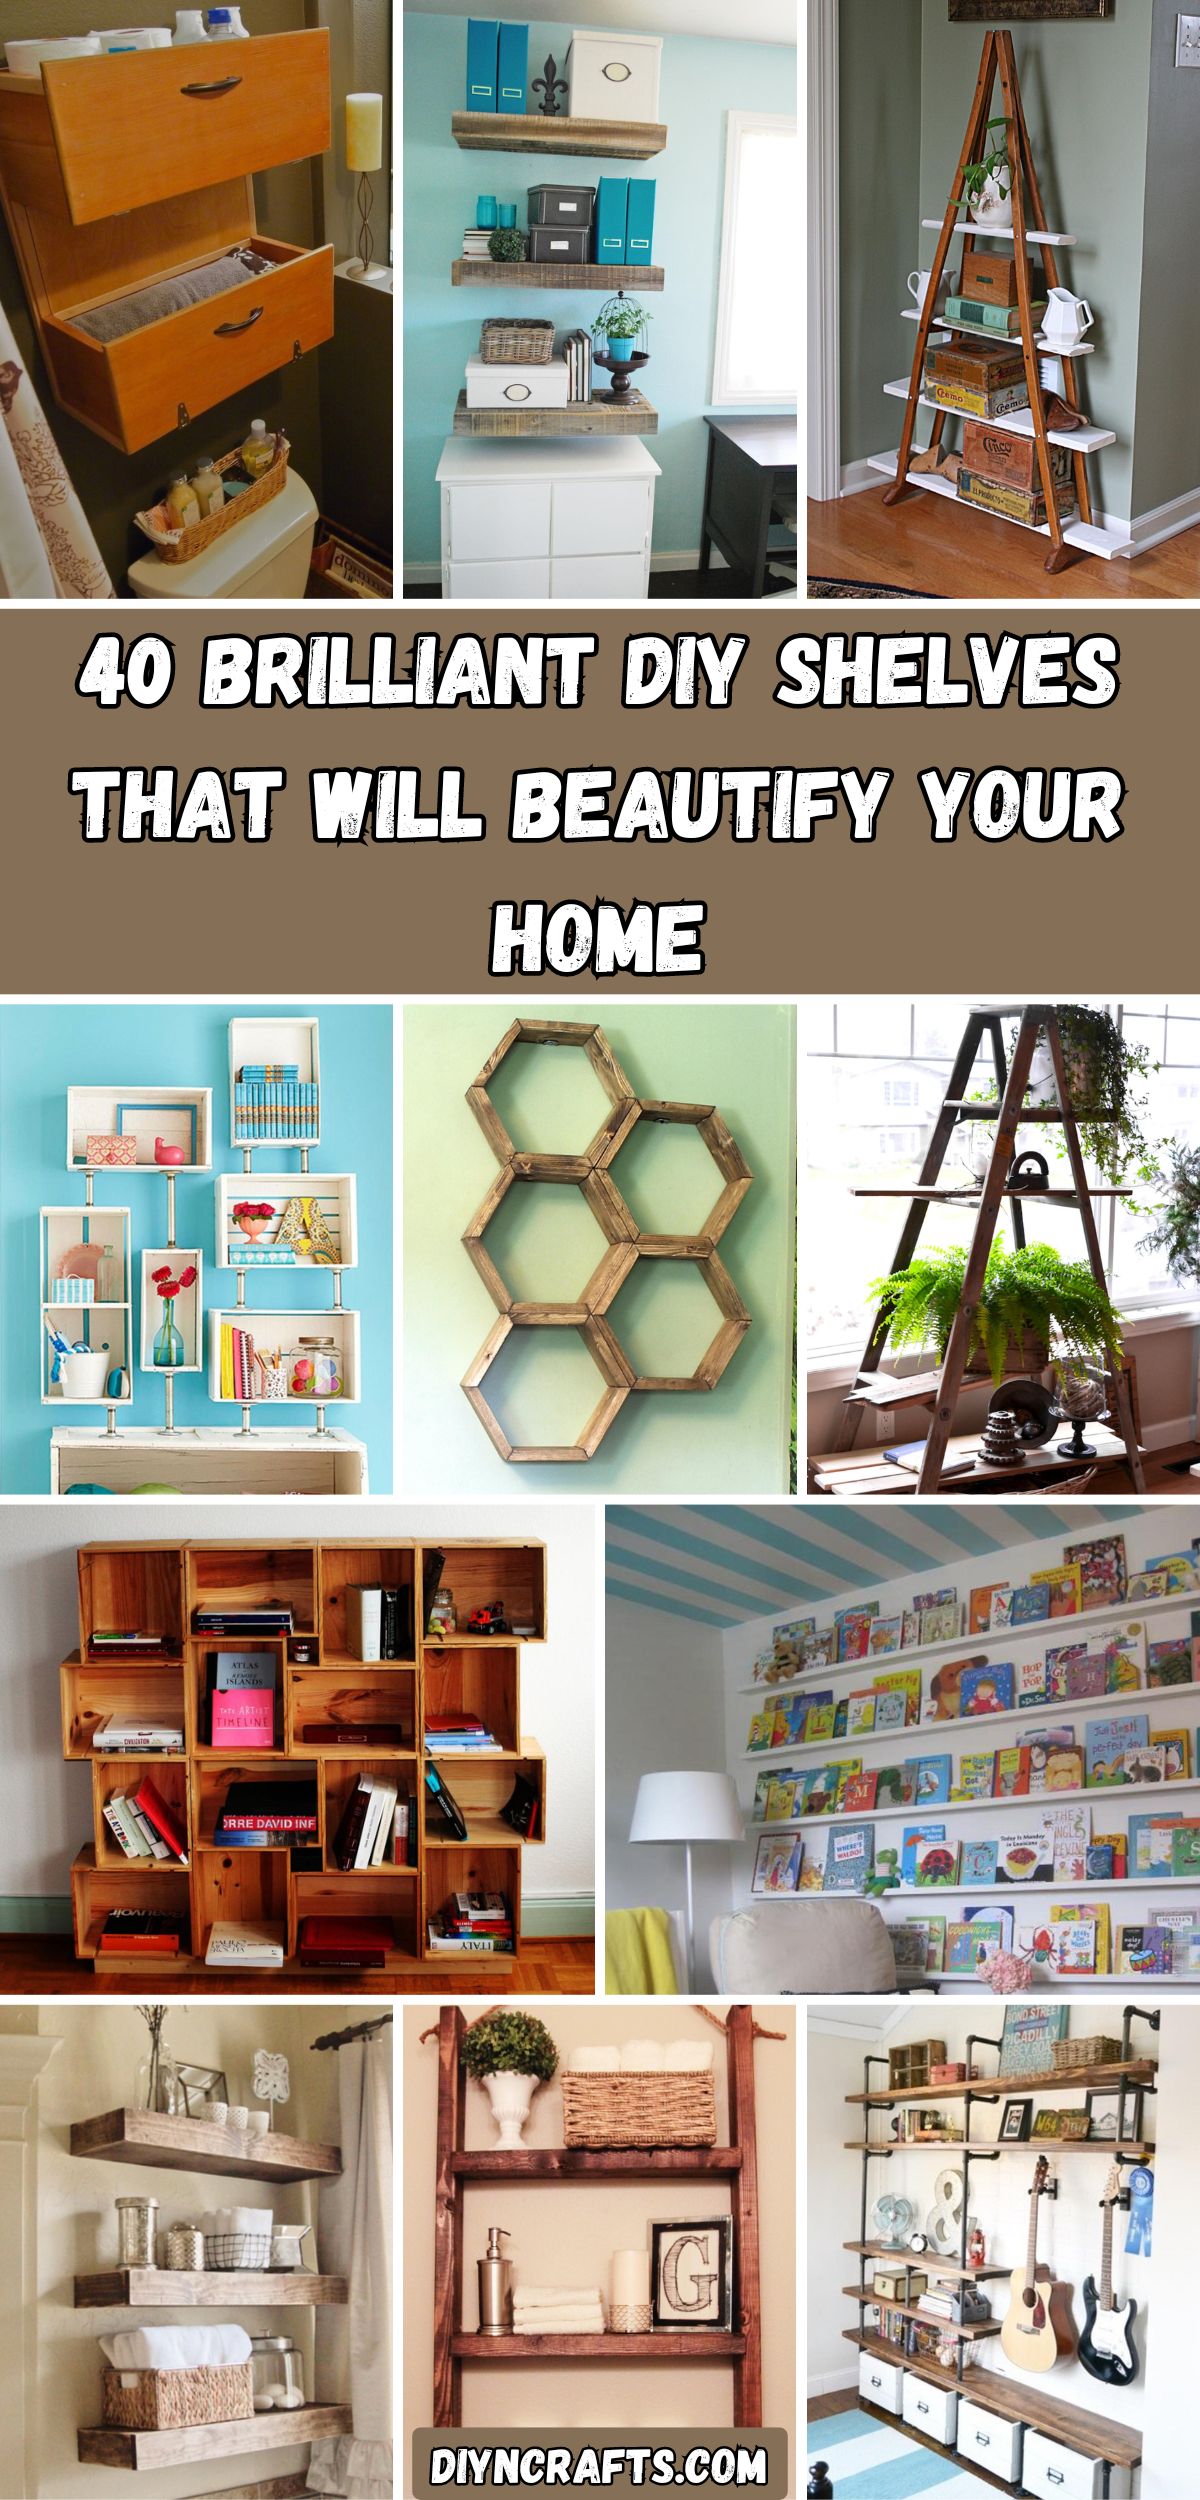 40 Brilliant DIY Shelves That Will Beautify Your Home collage.